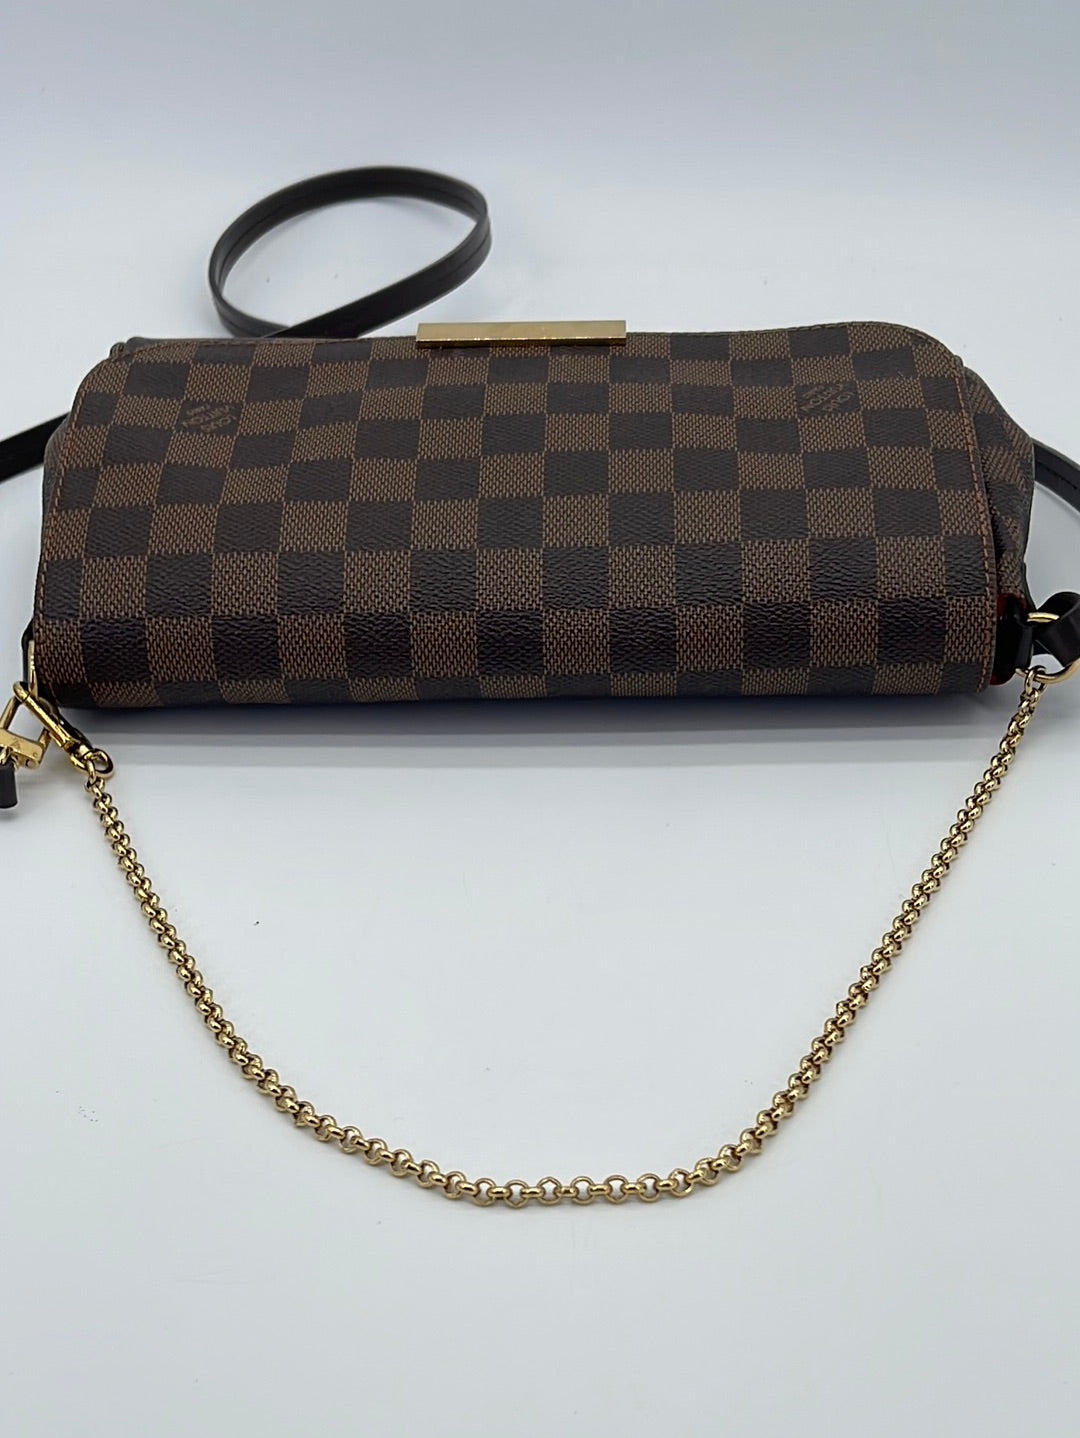 Louis Vuitton, Bags, Authentic Louis Vuitton Vtote Mm Brand New  Discontinued